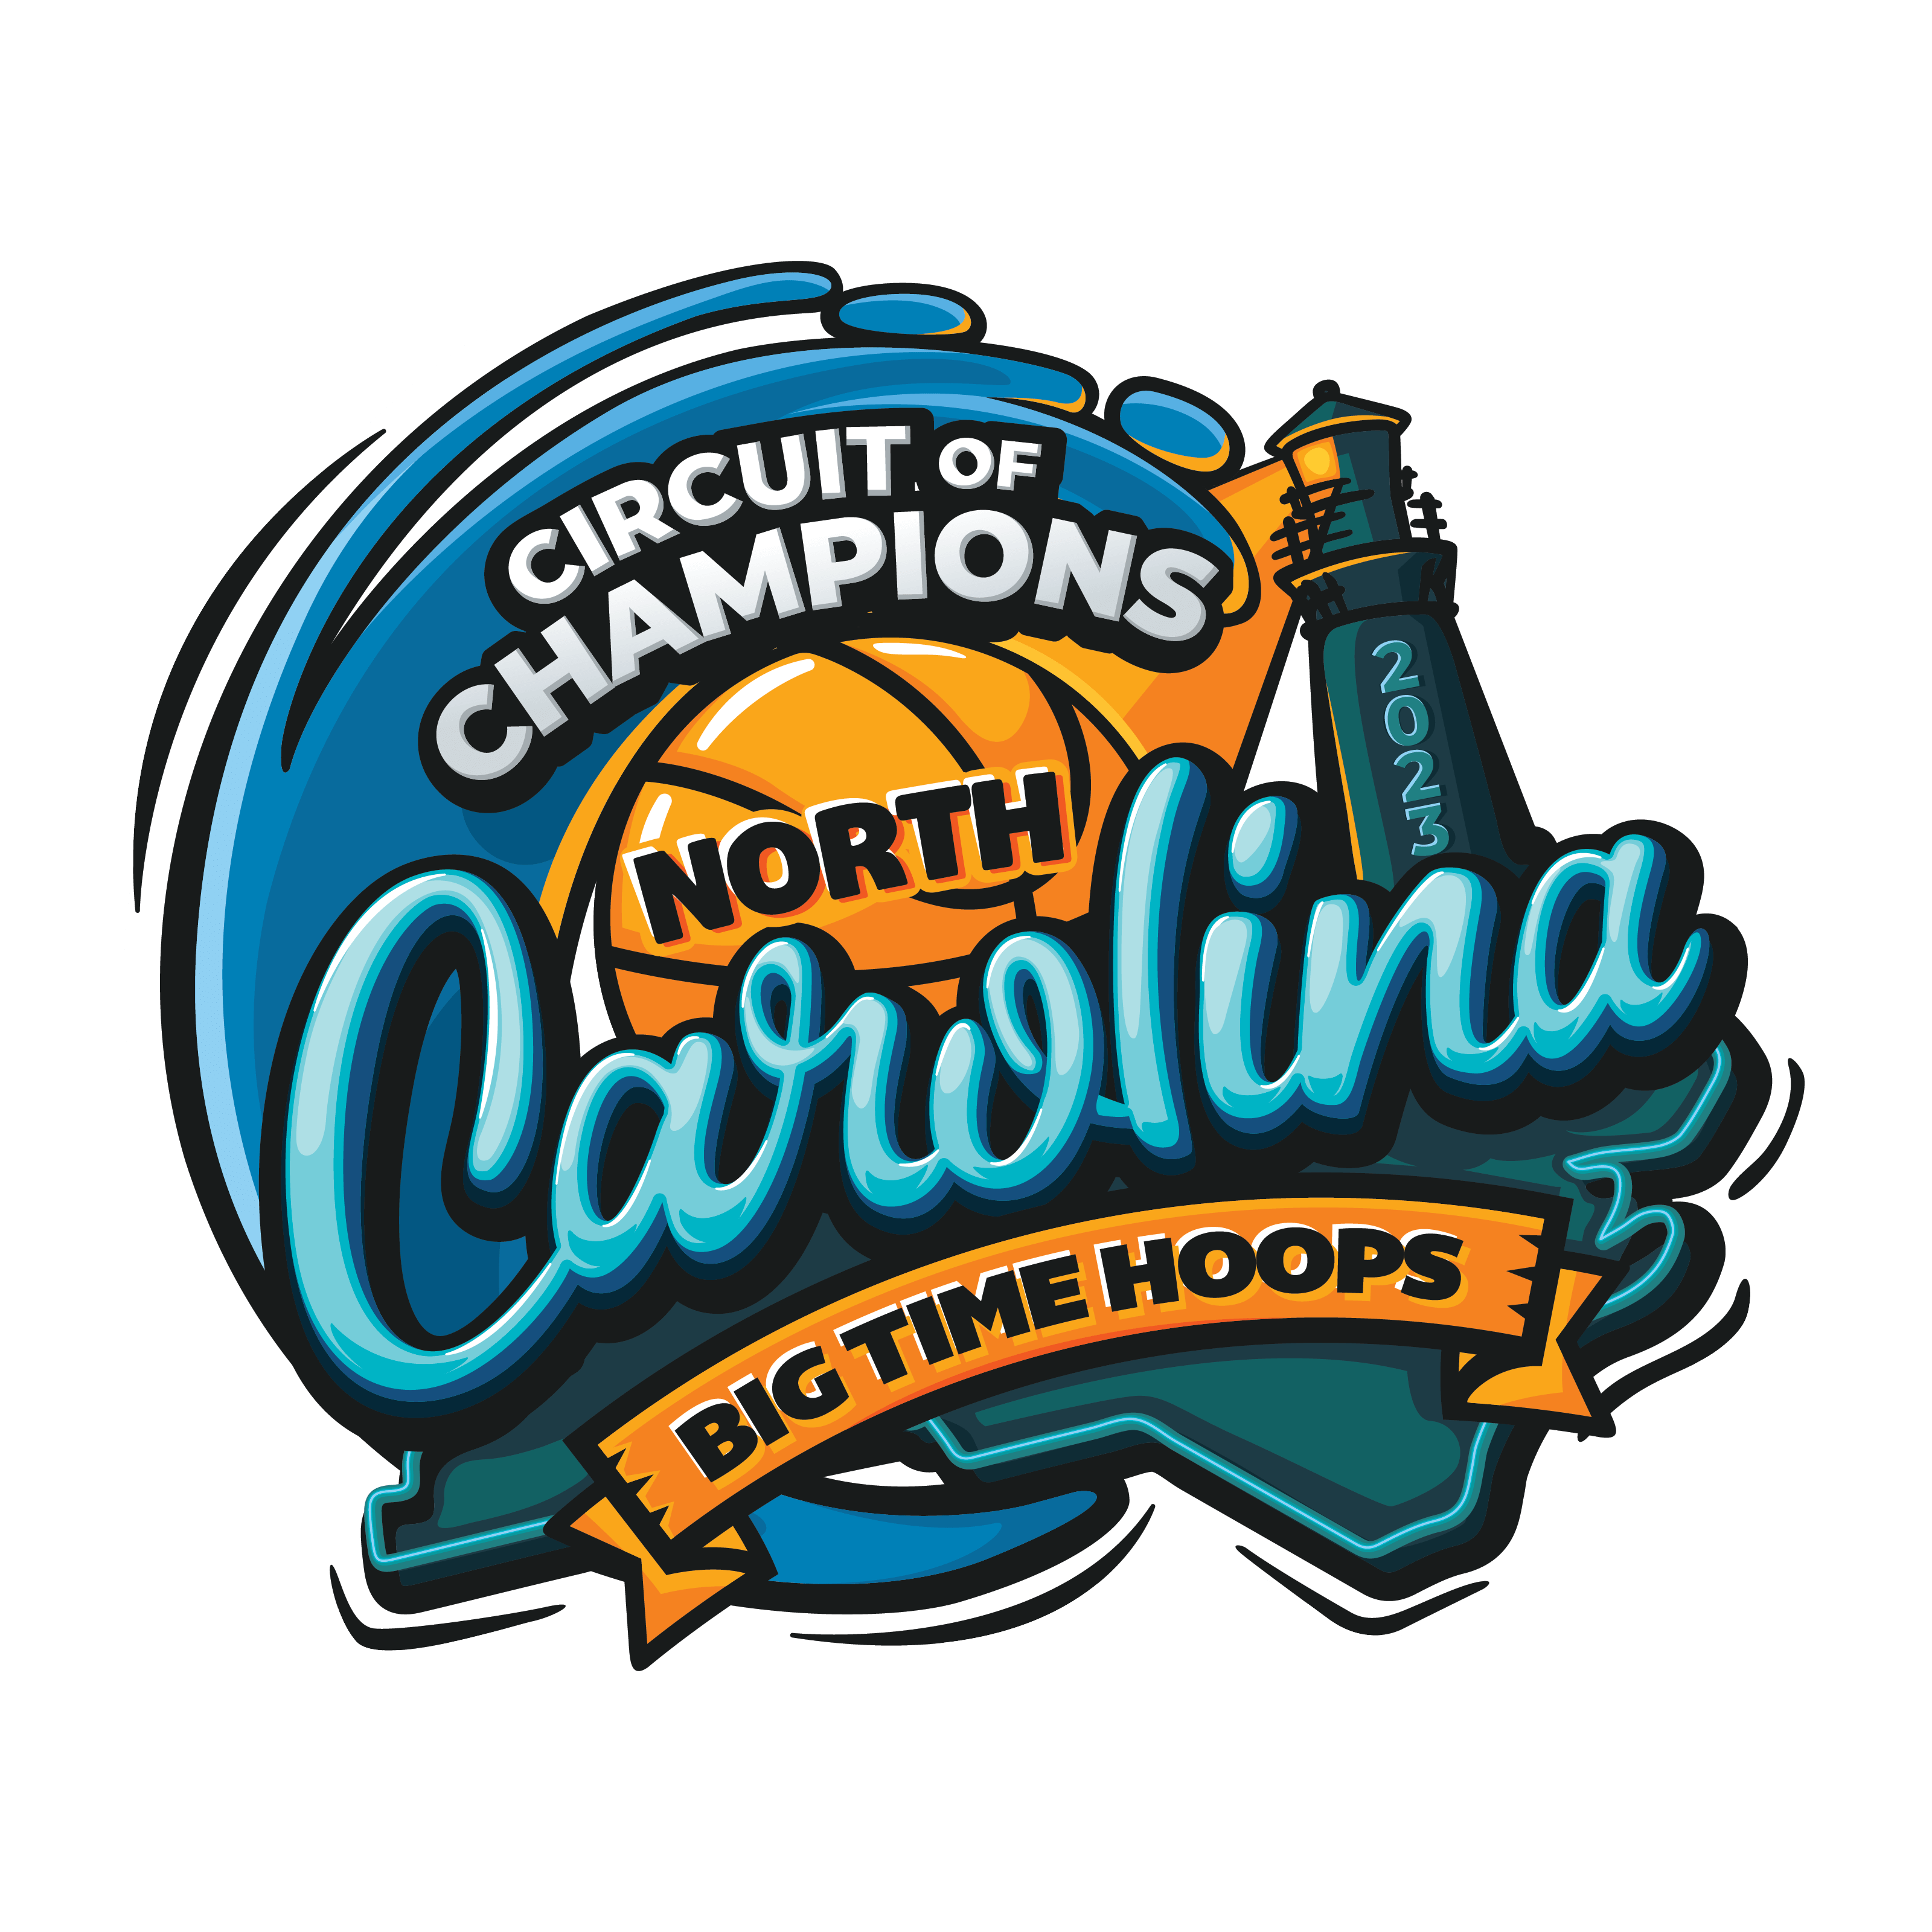 12-Circuit-of-Champions-Carolina-with-Outline